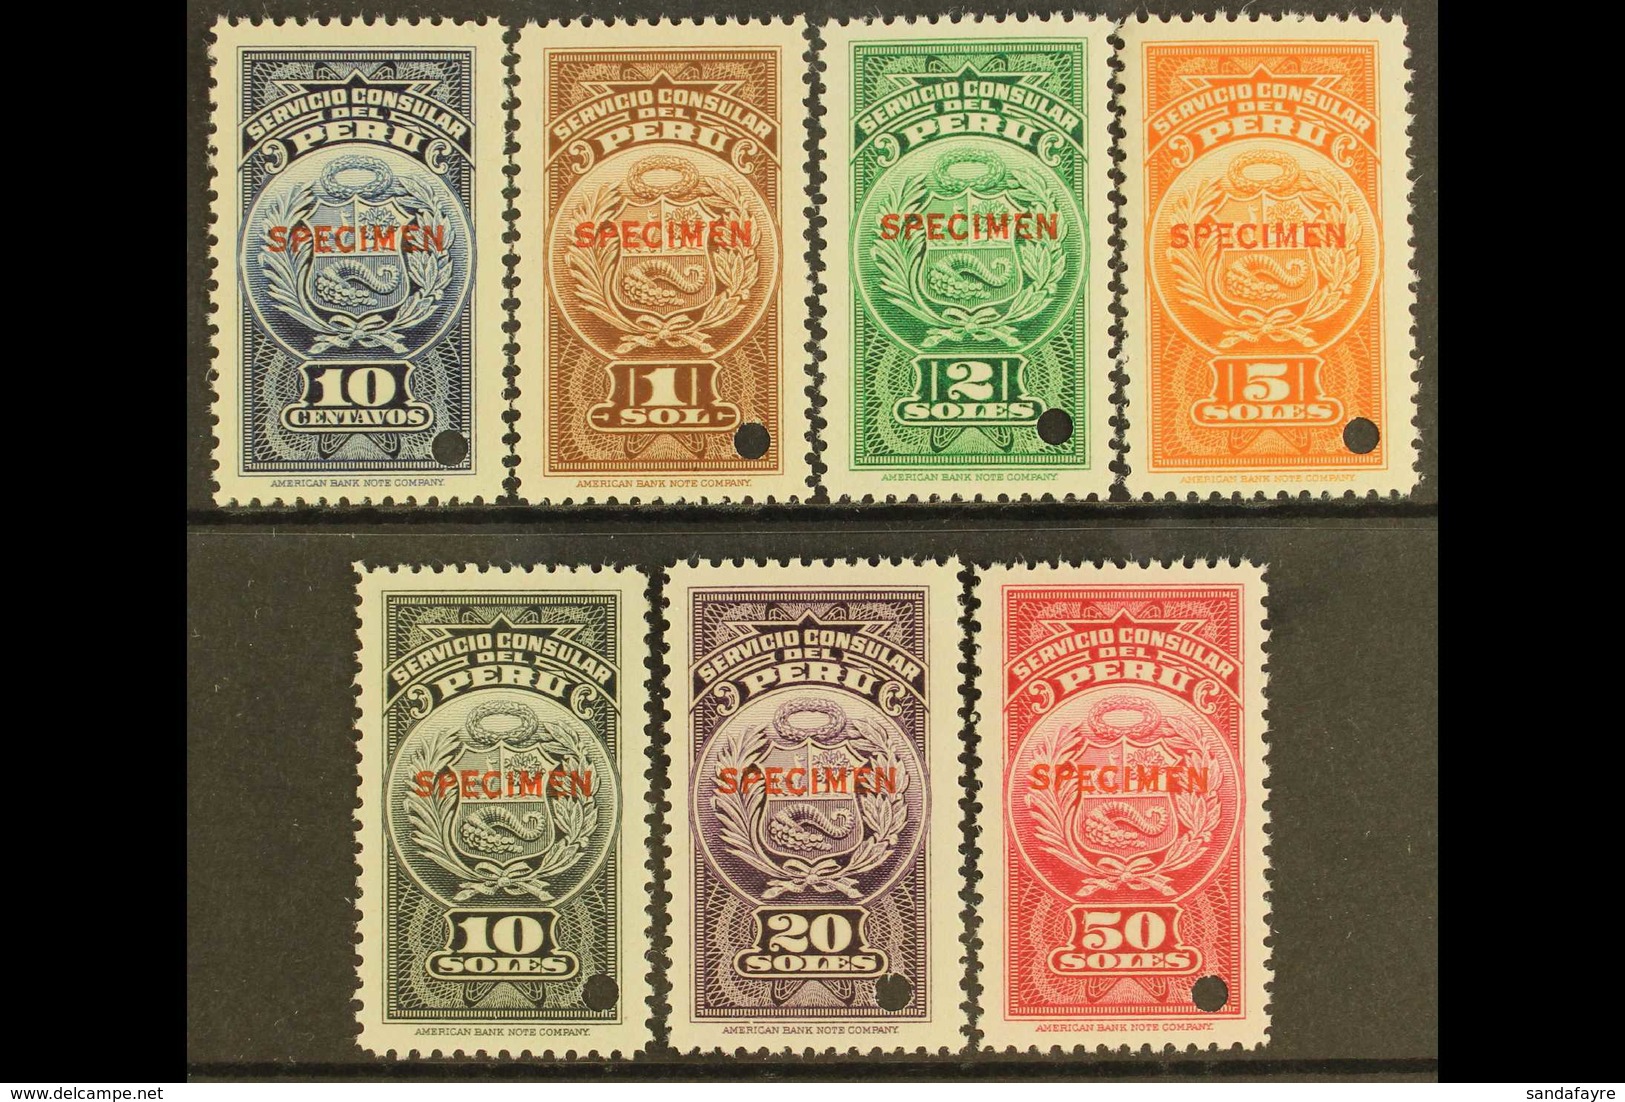 CONSULAR REVENUES 1938 Complete Set With "SPECIMEN" Overprints, Very Fine Never Hinged Mint, With Small Security Punch-h - Peru